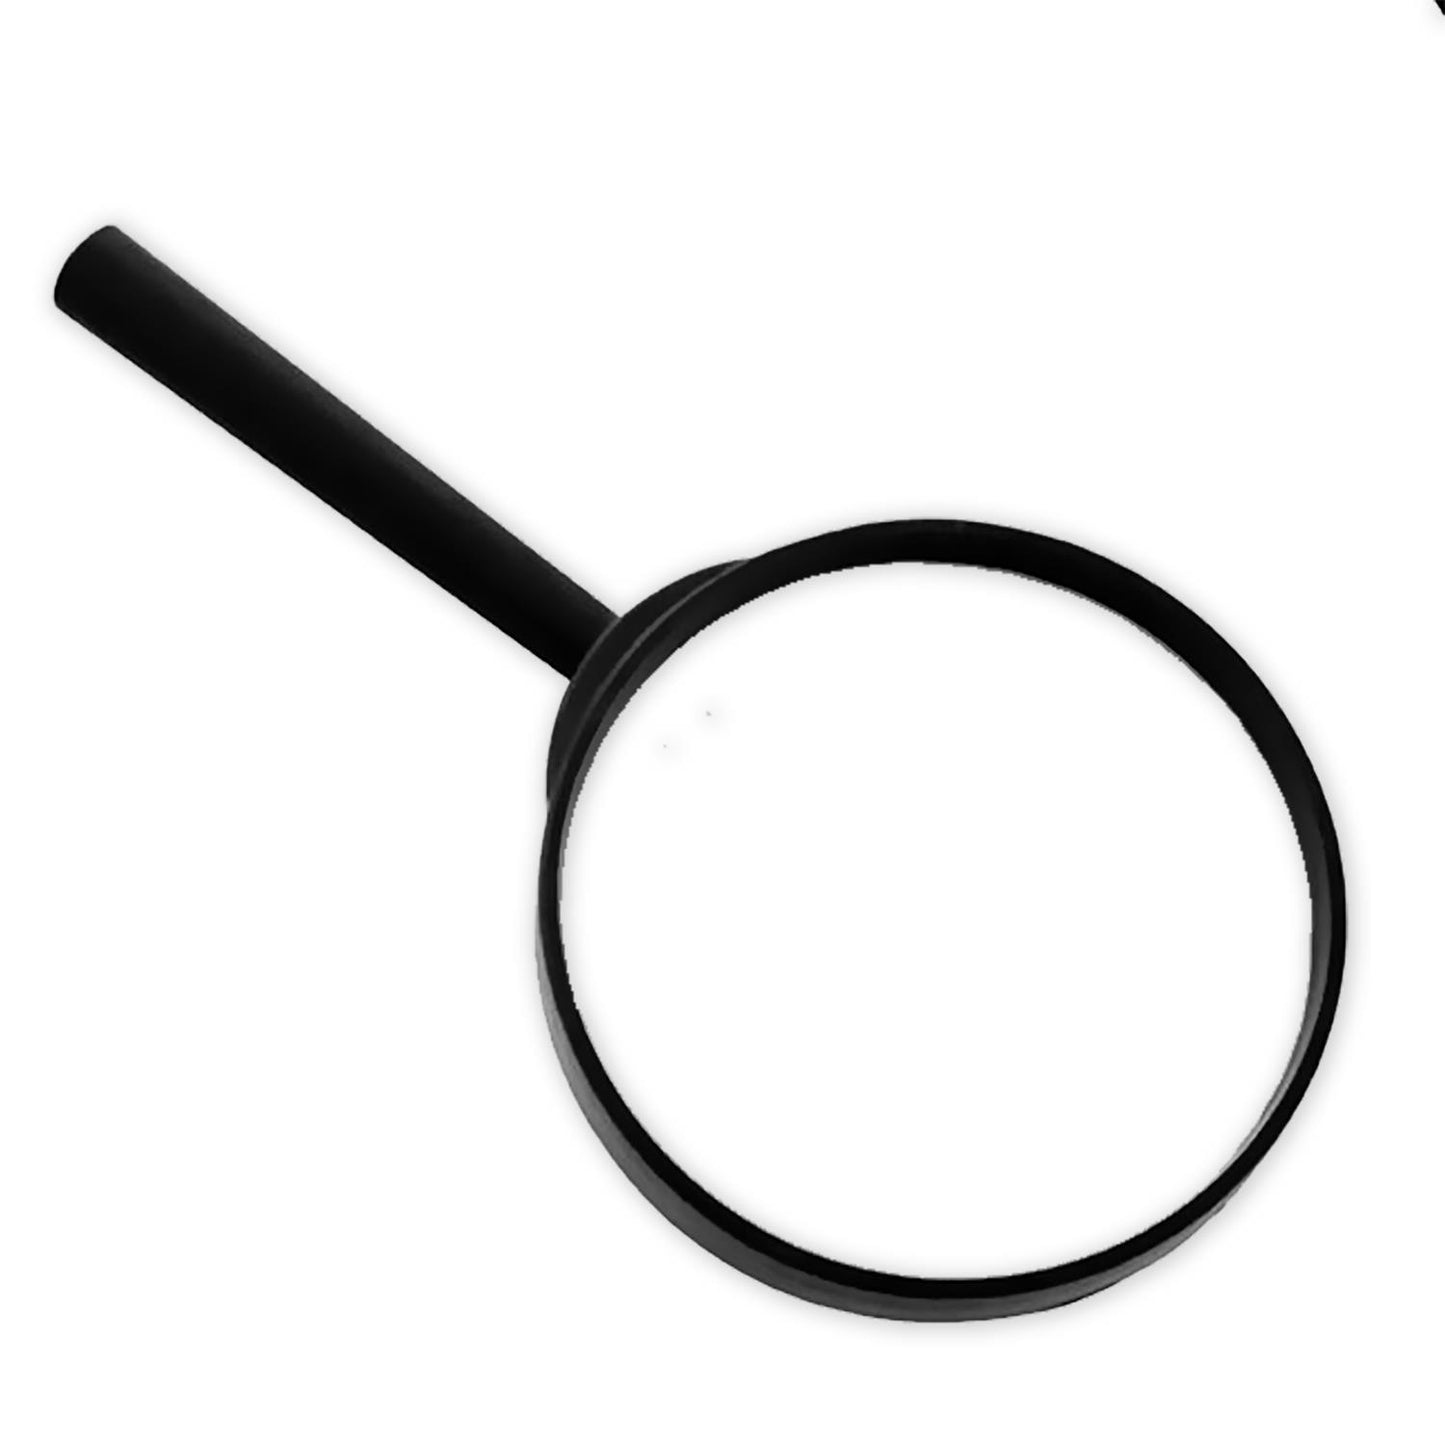 Clear And Precise Magnifying Glass Set (2-Pack)